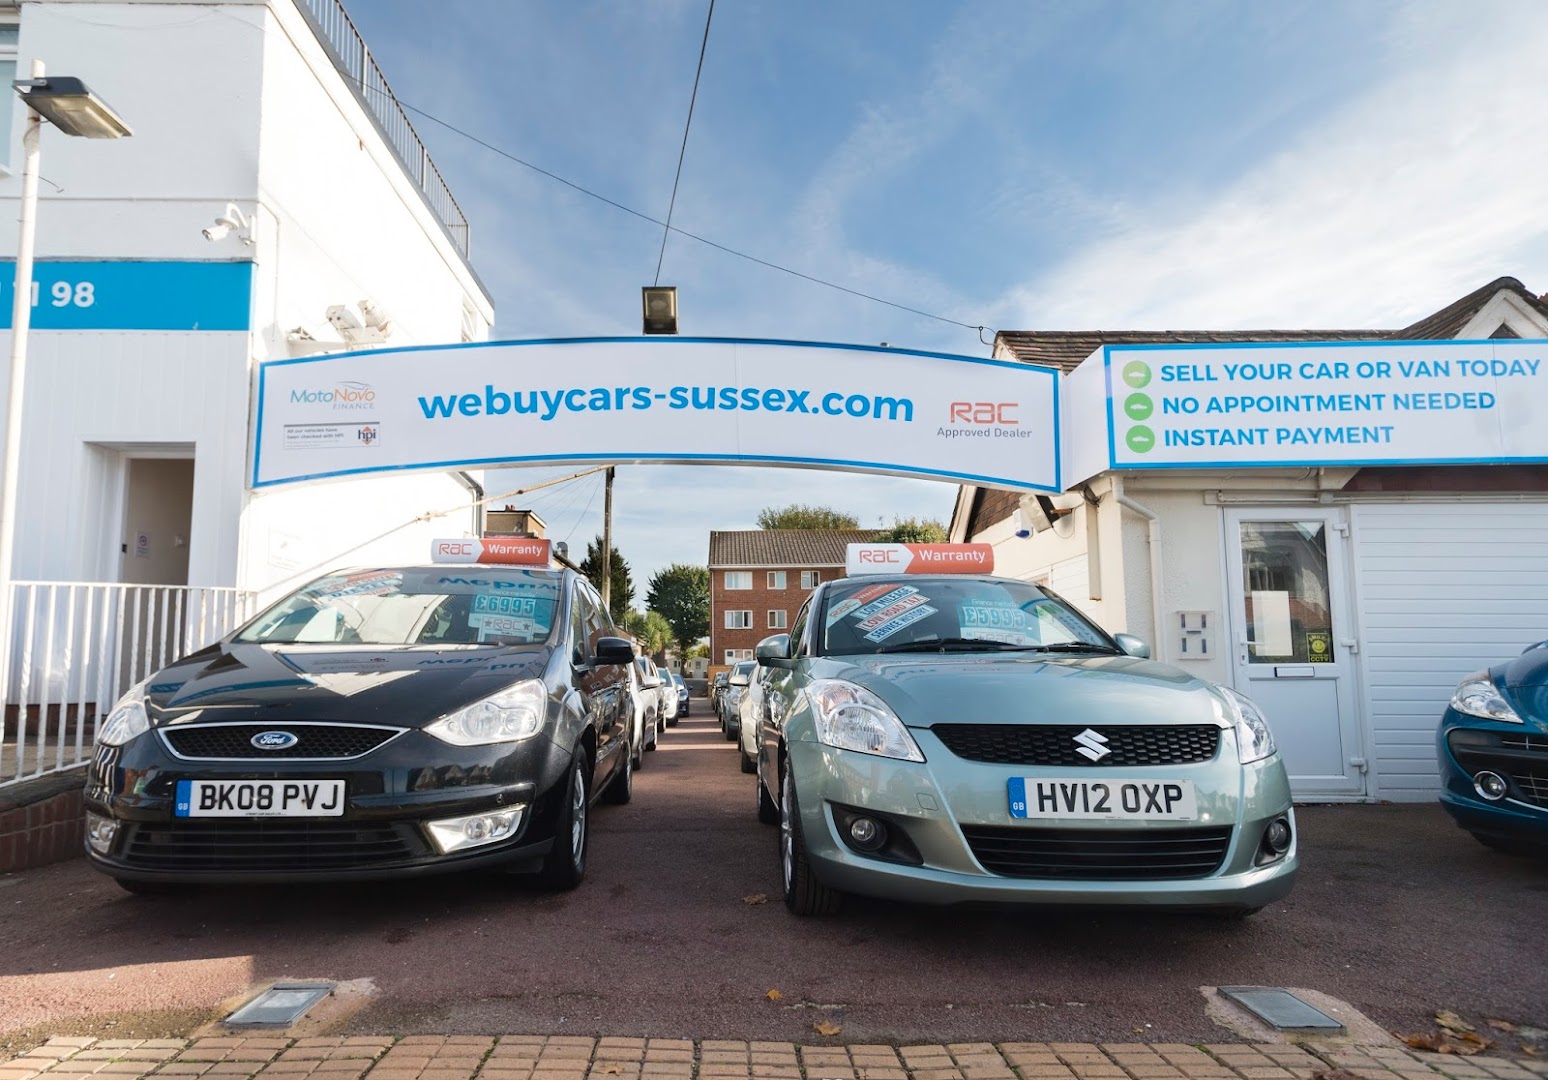 Webuycars-sussex.com, Hove branch